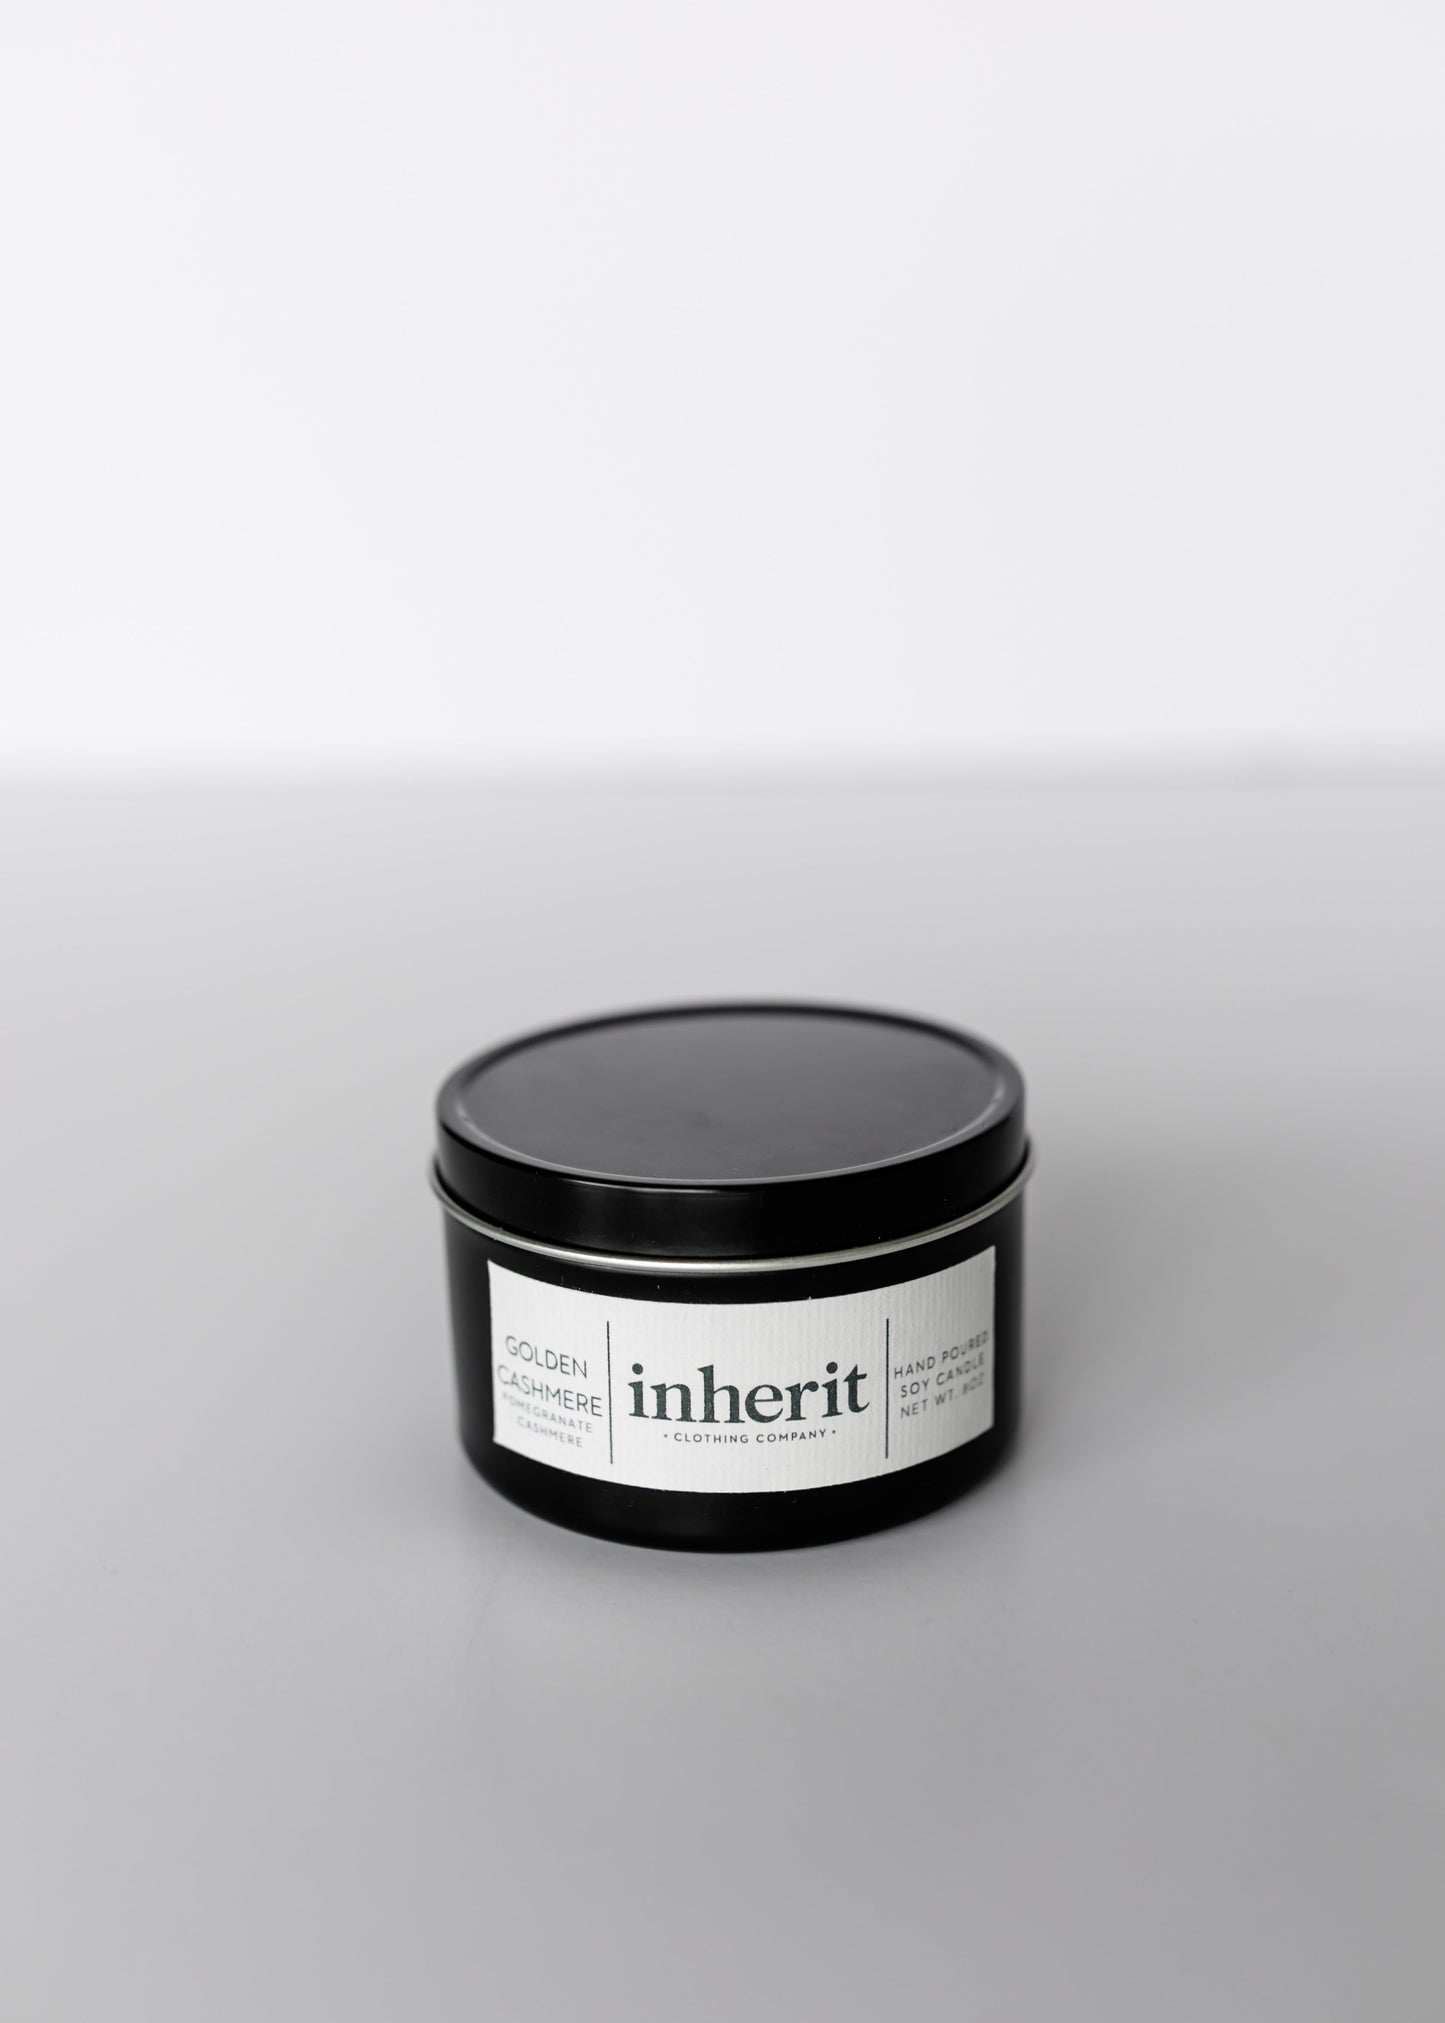 Inherit Winter Scented Soy Candle 8oz. - FINAL SALE Gifts Golden Cashmere